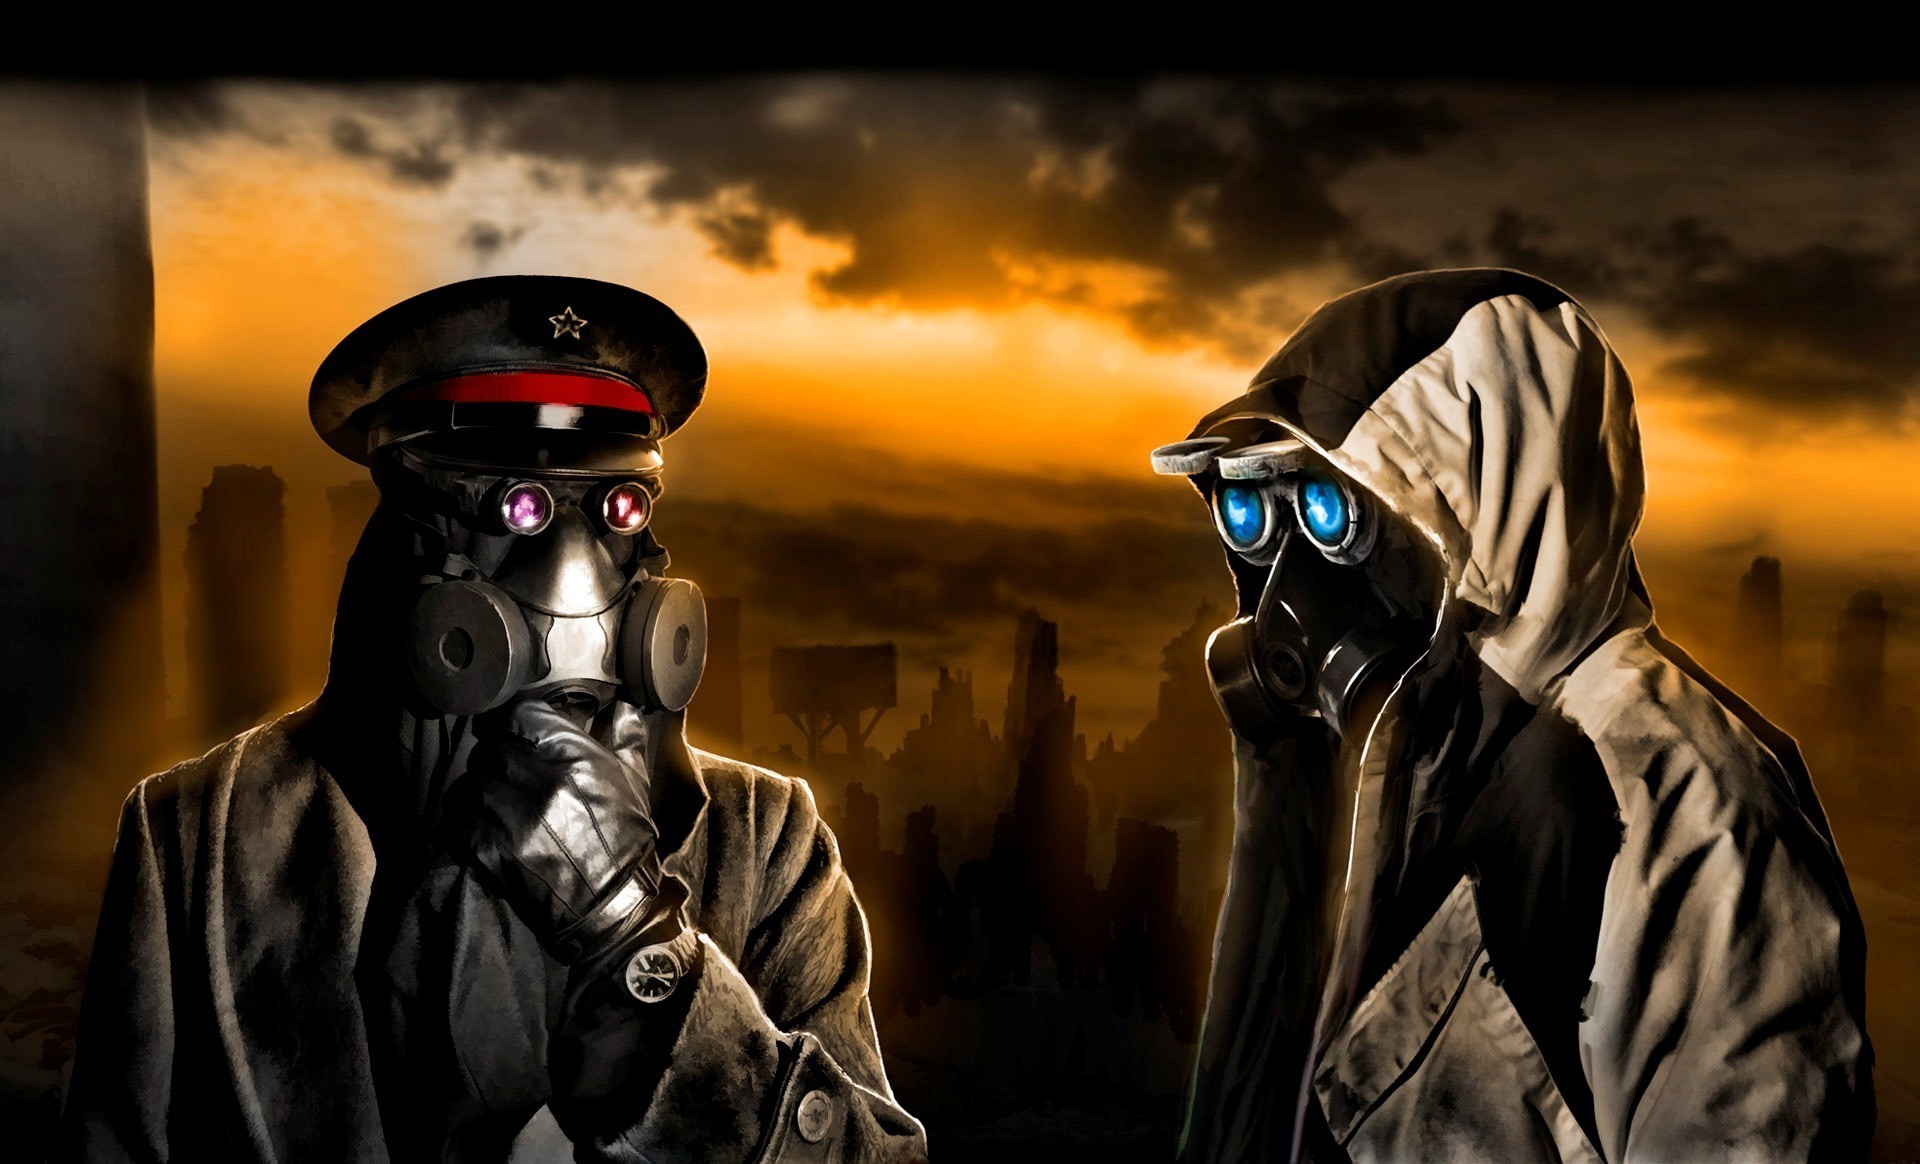 artwork, Apocalyptic, Men, Gas masks, Coats, Glasses, Clouds, Sunlight, Romantically Apocalyptic, Vitaly S Alexius Wallpaper